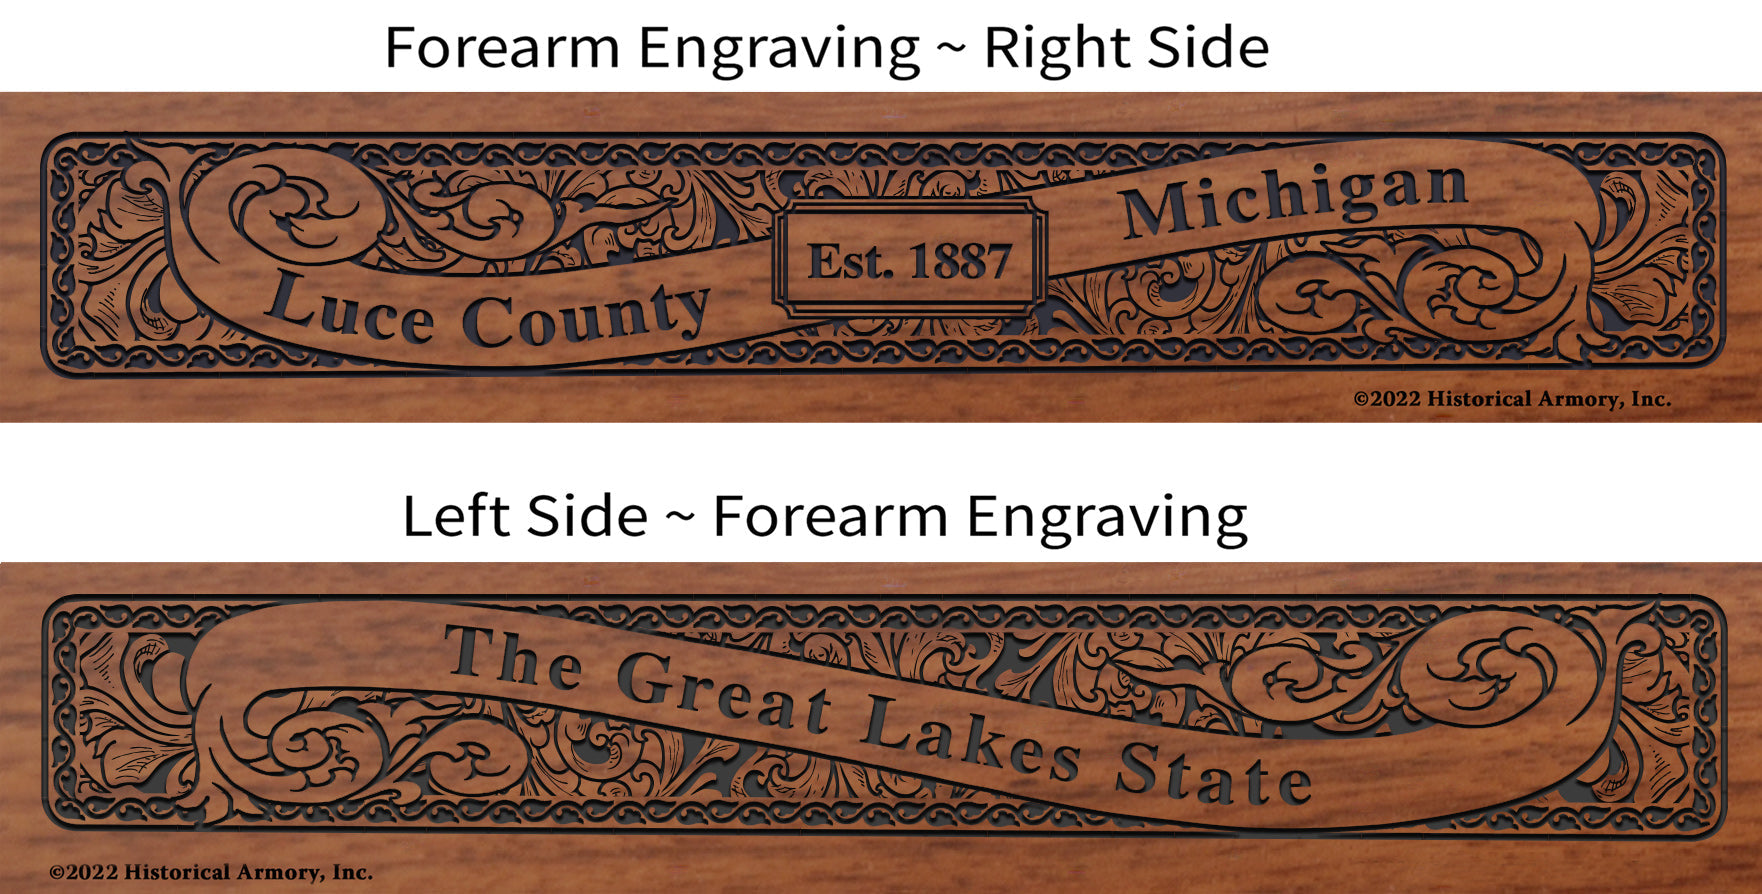 Luce County Michigan Engraved Rifle Forearm